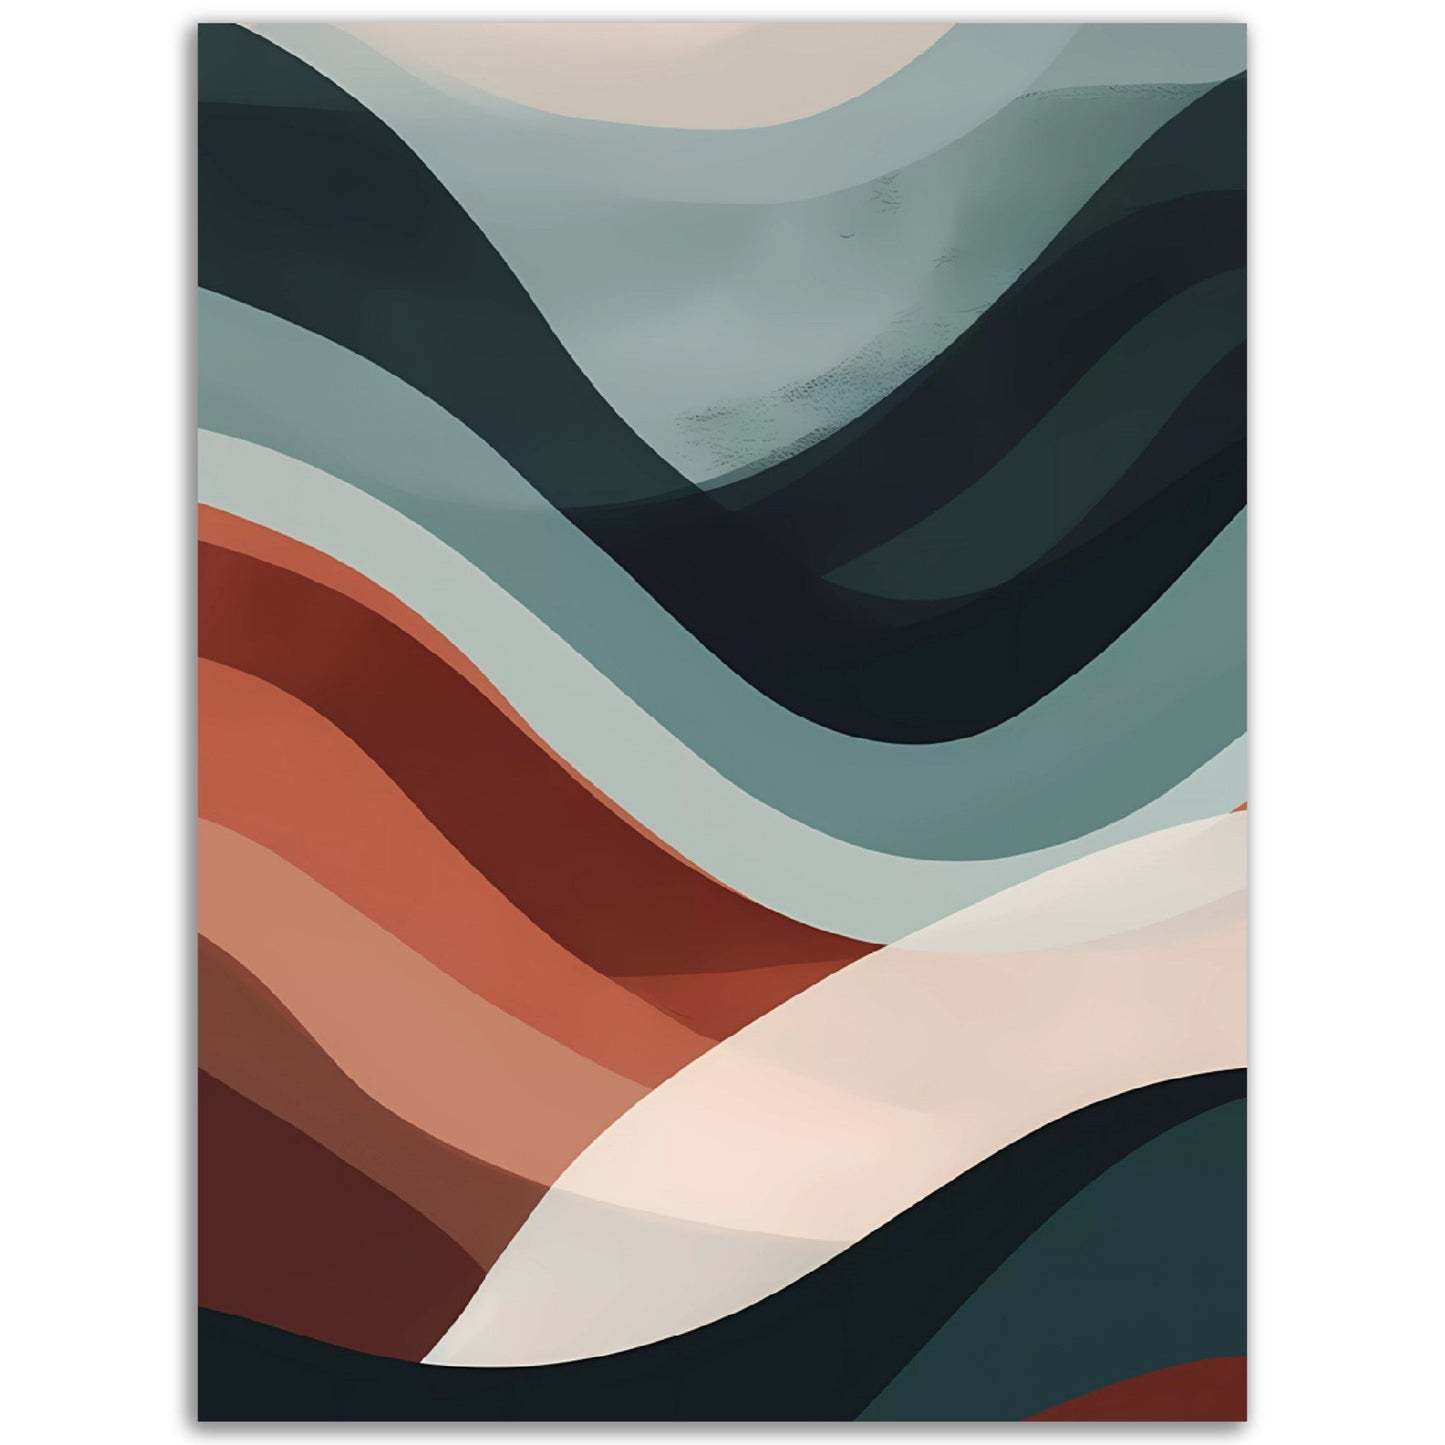 An Abstract Art painting of Rolling Hills on a black background, perfect as colored wall art for your room.